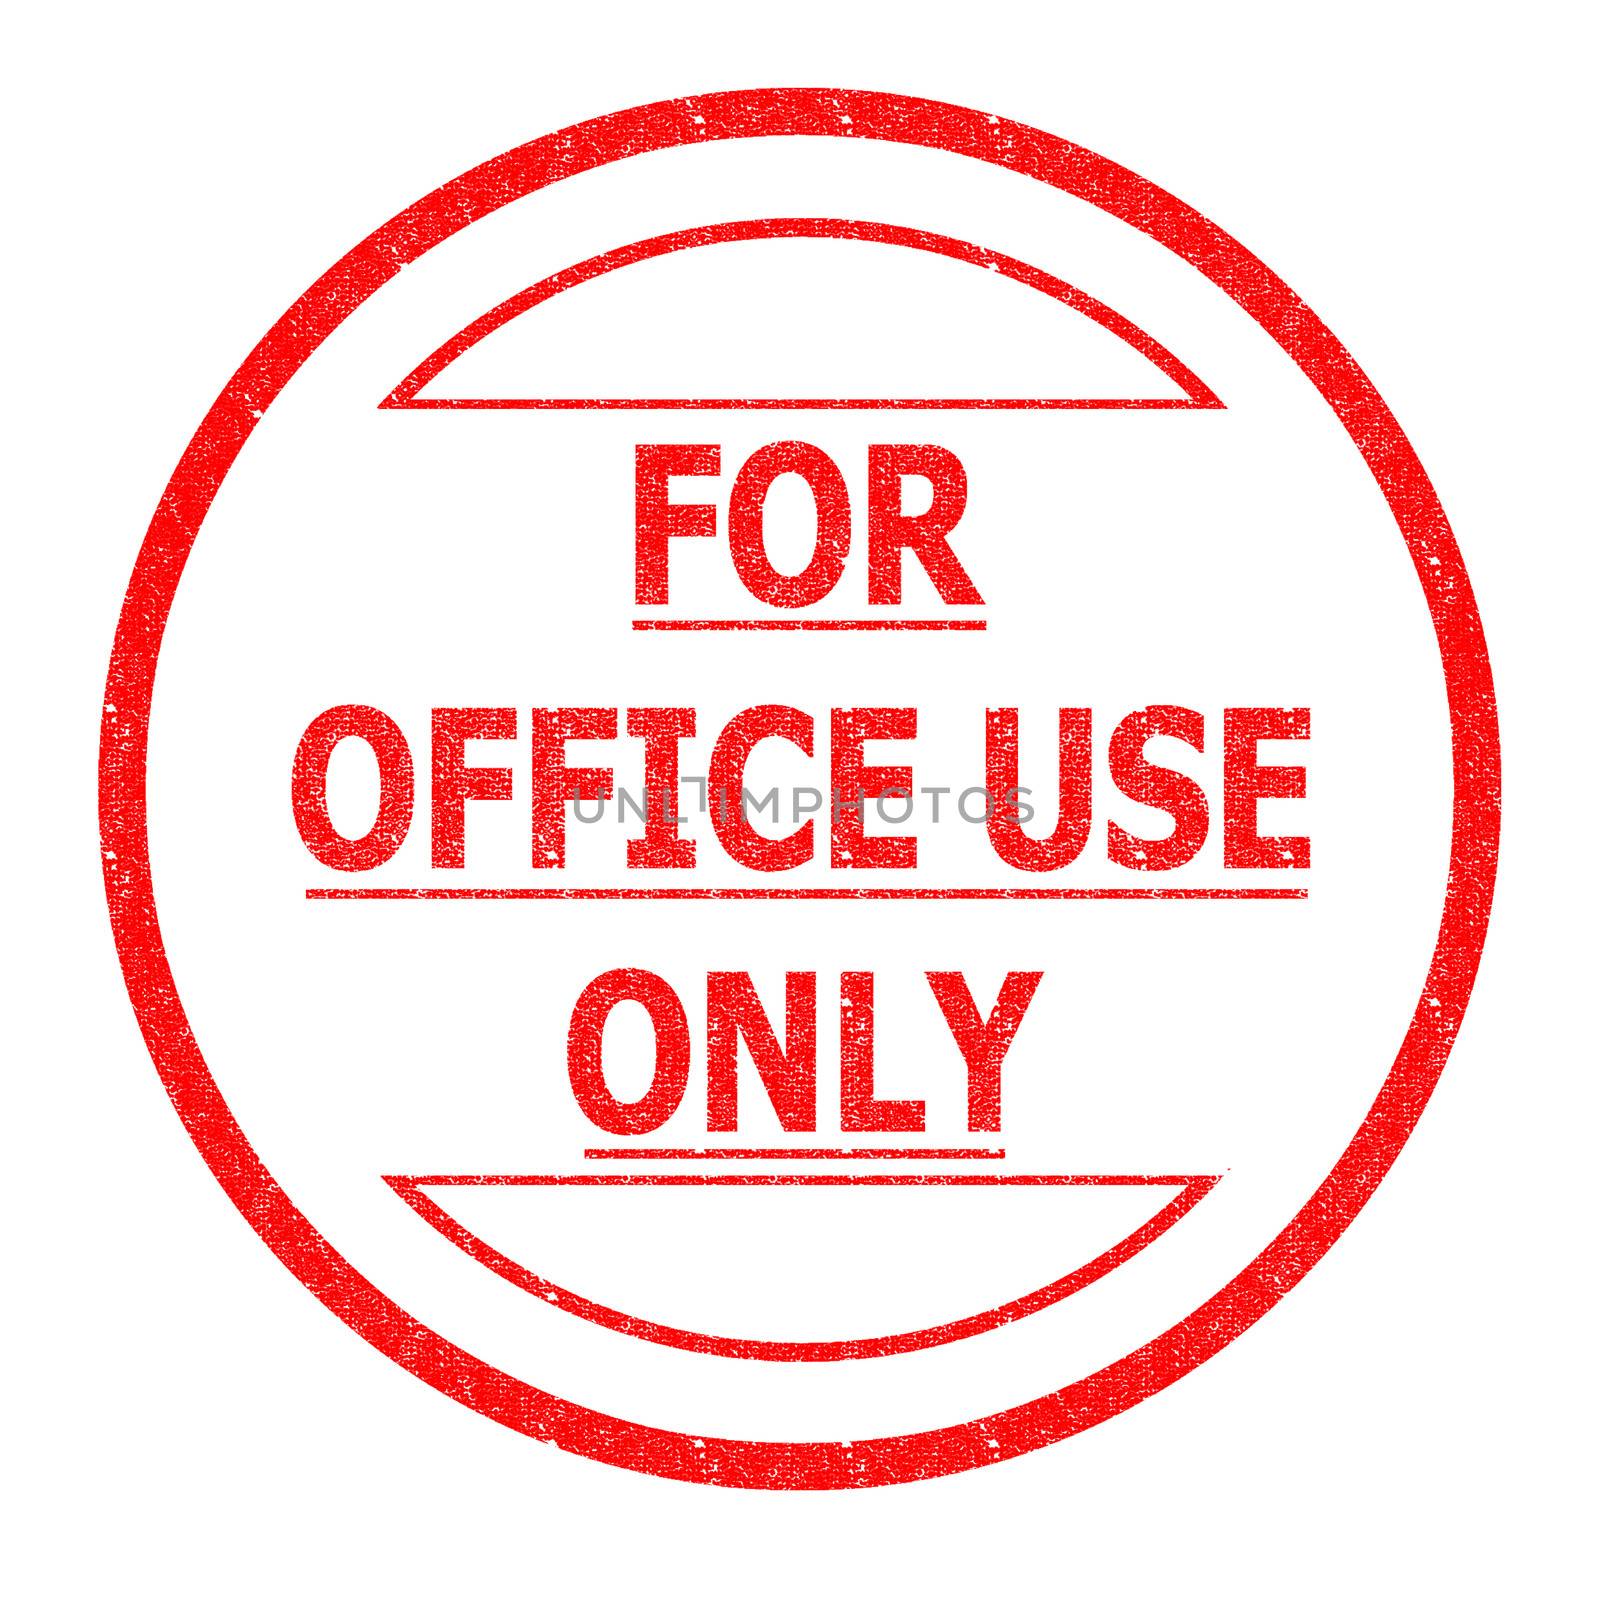 FOR OFFICE USE ONLY by chrisdorney